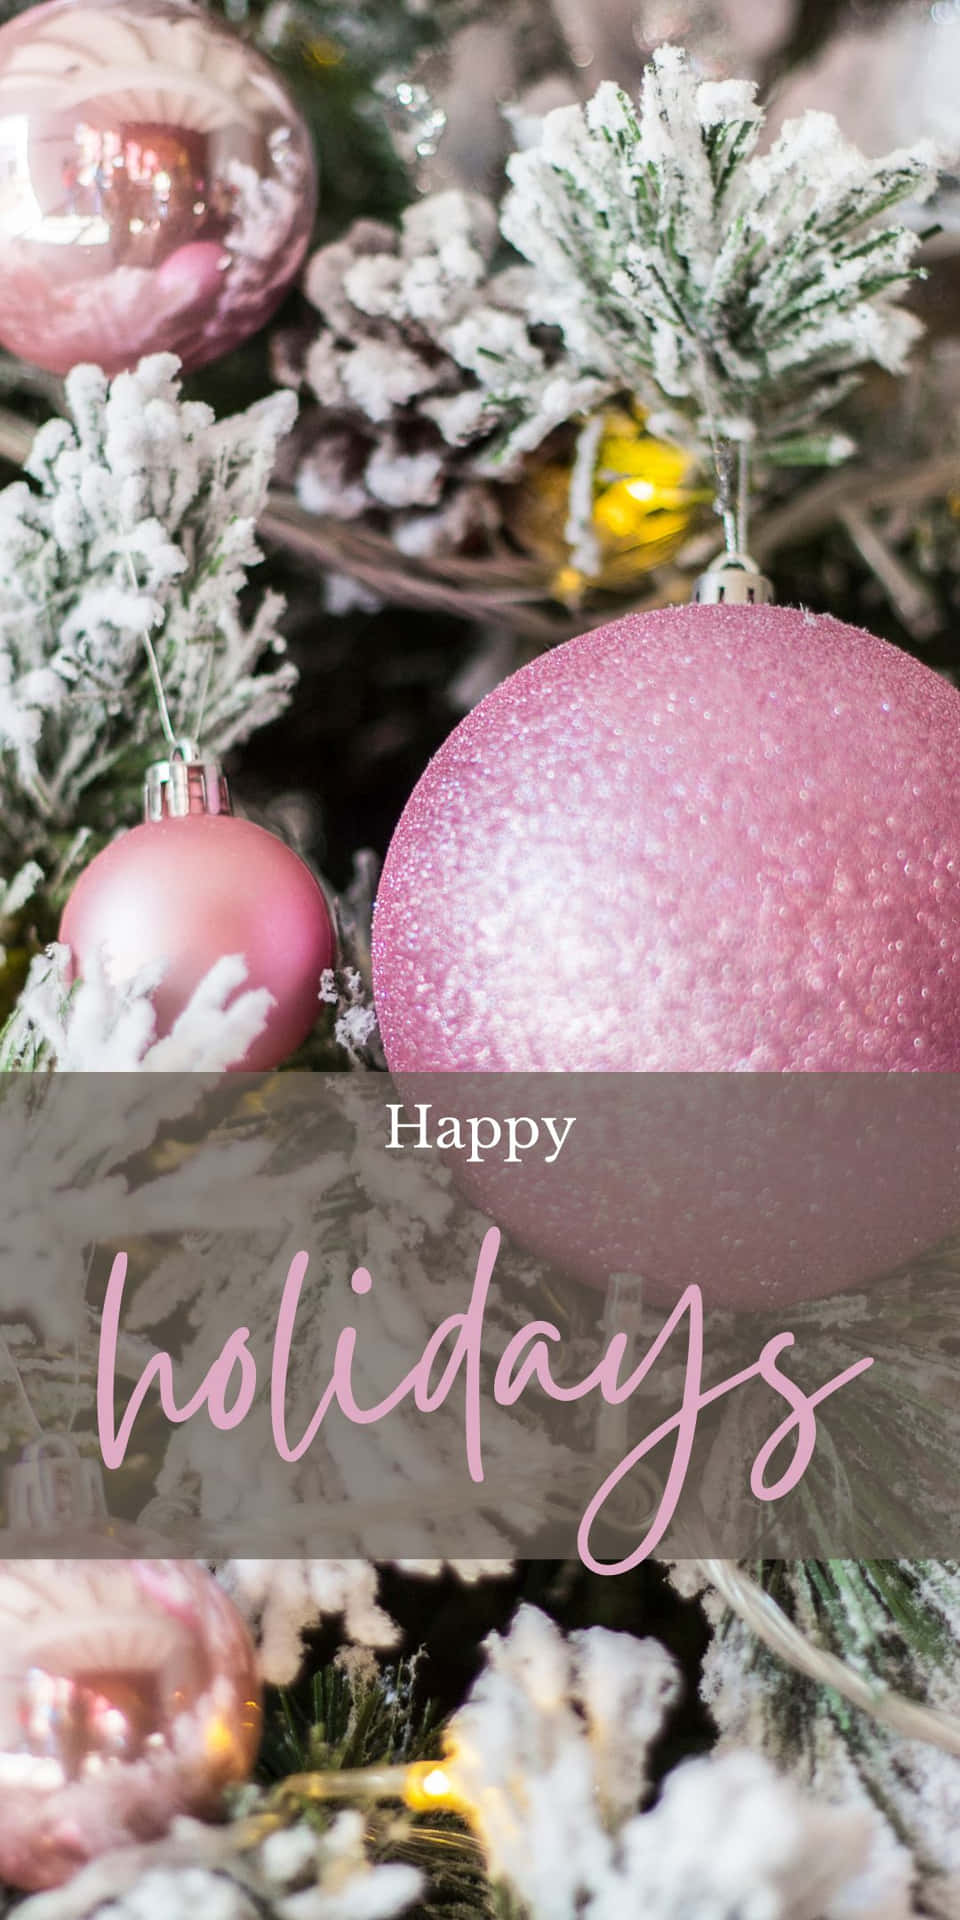 Celebrate the Holidays with a Vibrant Pink Christmas!